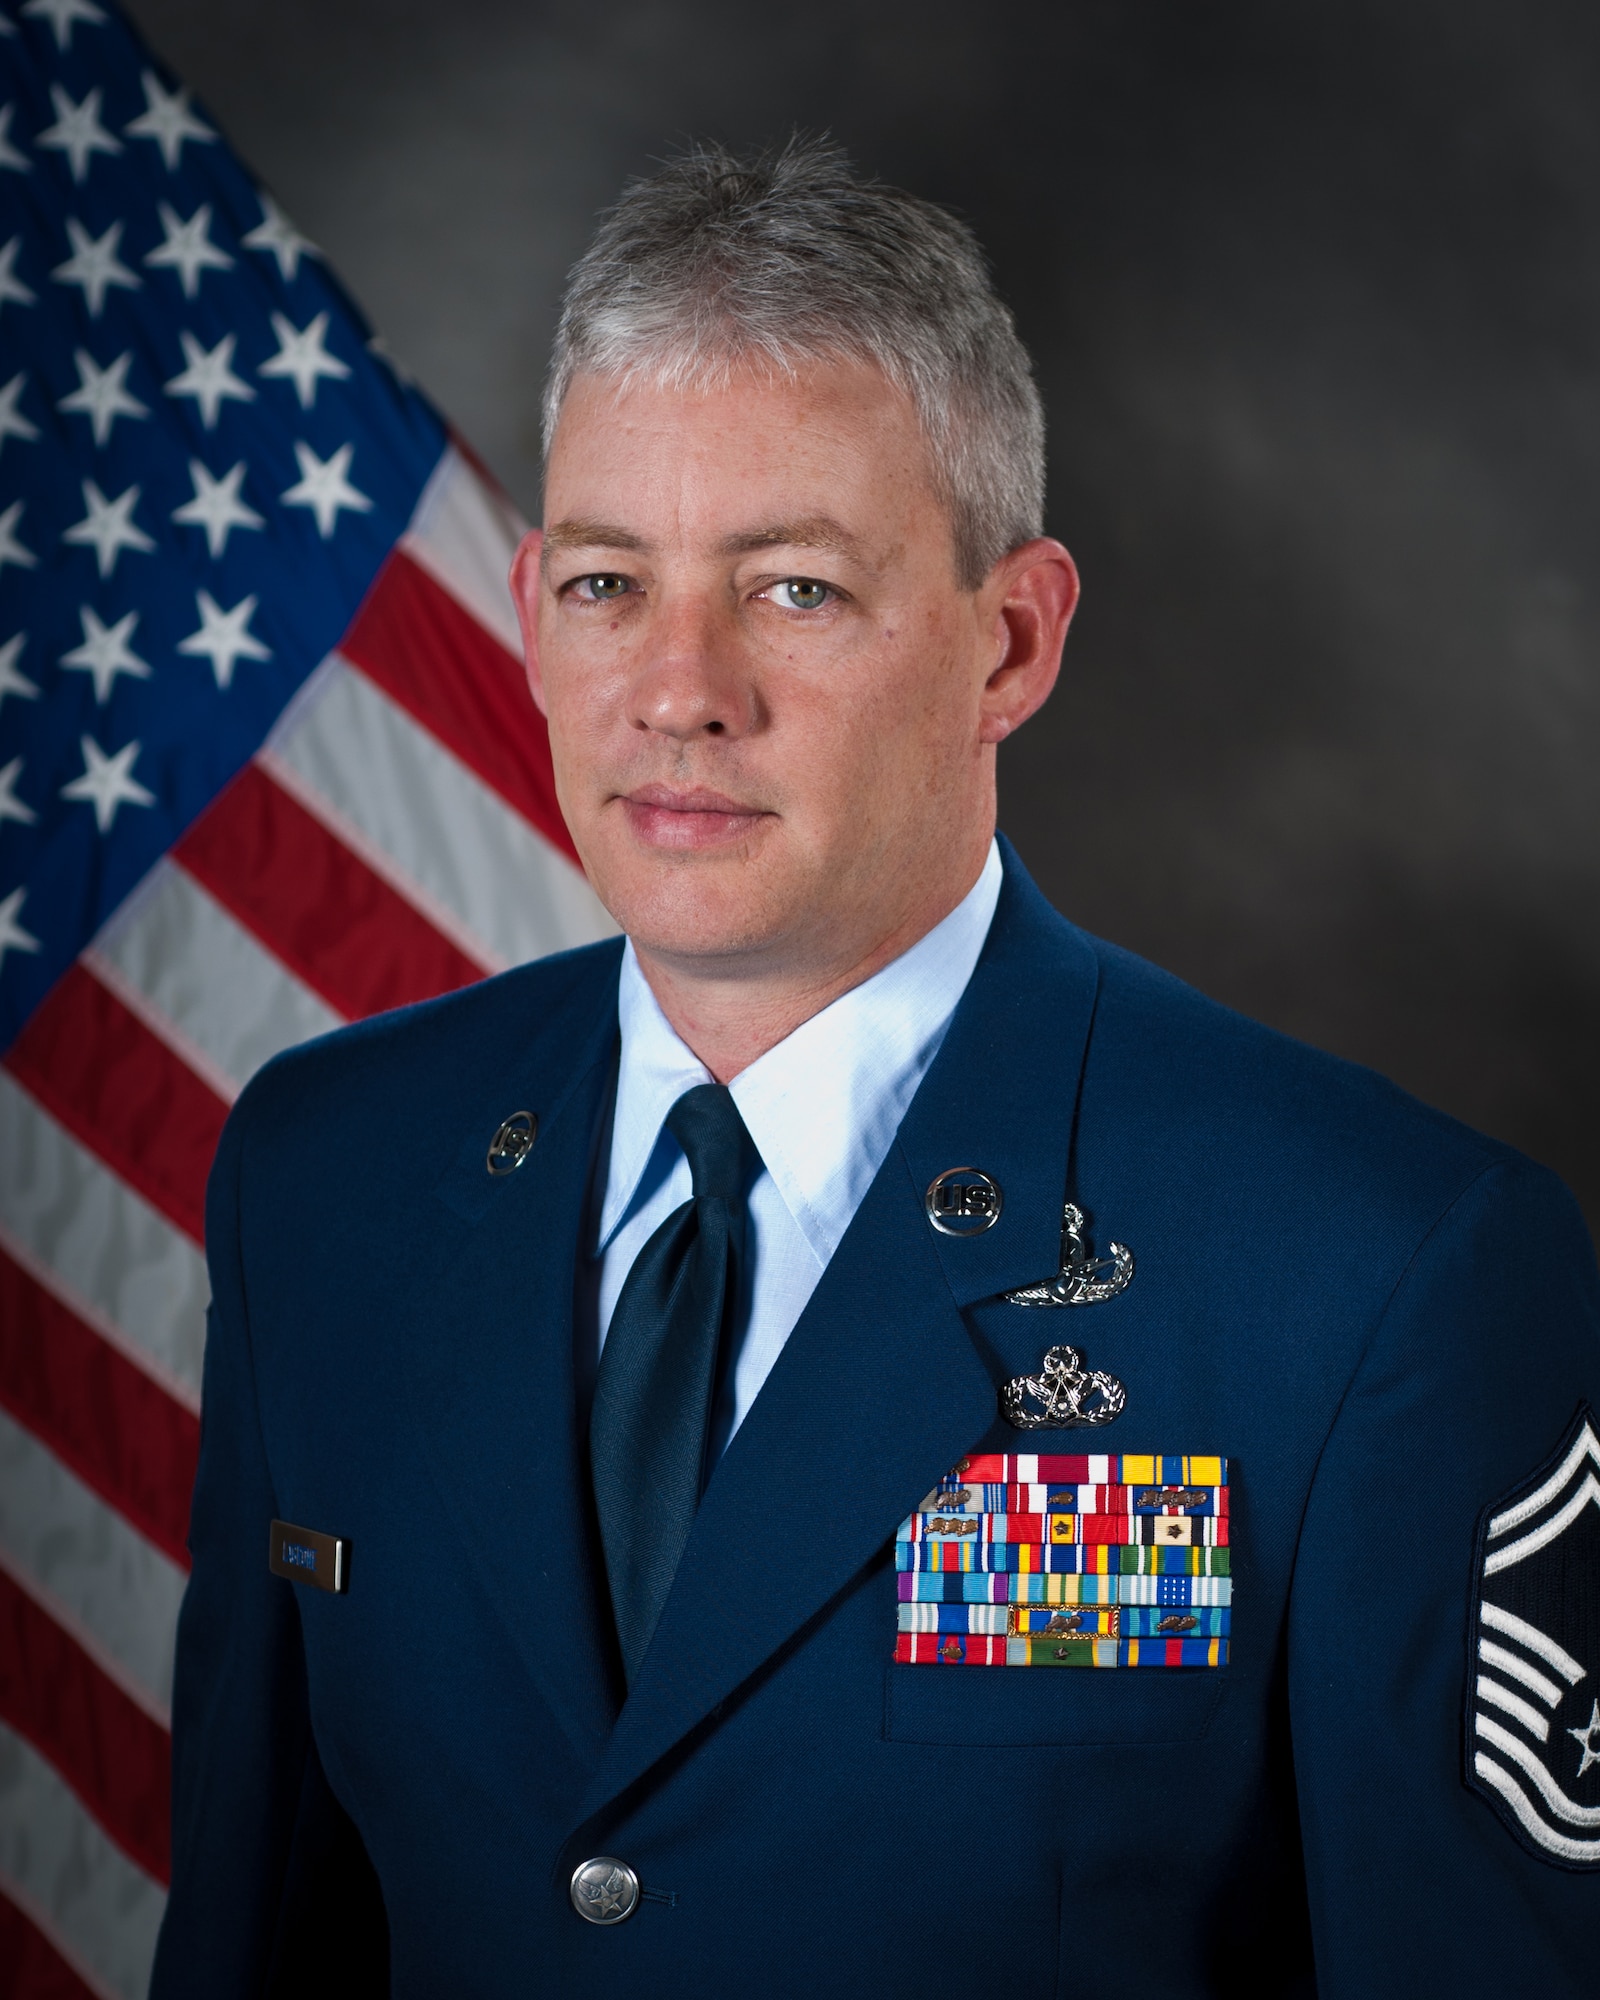 Senior Master Sgt. Shane LaGrone is the Kentucky Air National Guard's 2014 Outstanding Airman of the Year in the Senior Non-Commissioned Officer category. He will be honored during a banquet to be held March 22, 2014, at the Kentucky Fair and Exposition Center. (U.S. Air National Guard photo by Master Sgt. Philip Speck)